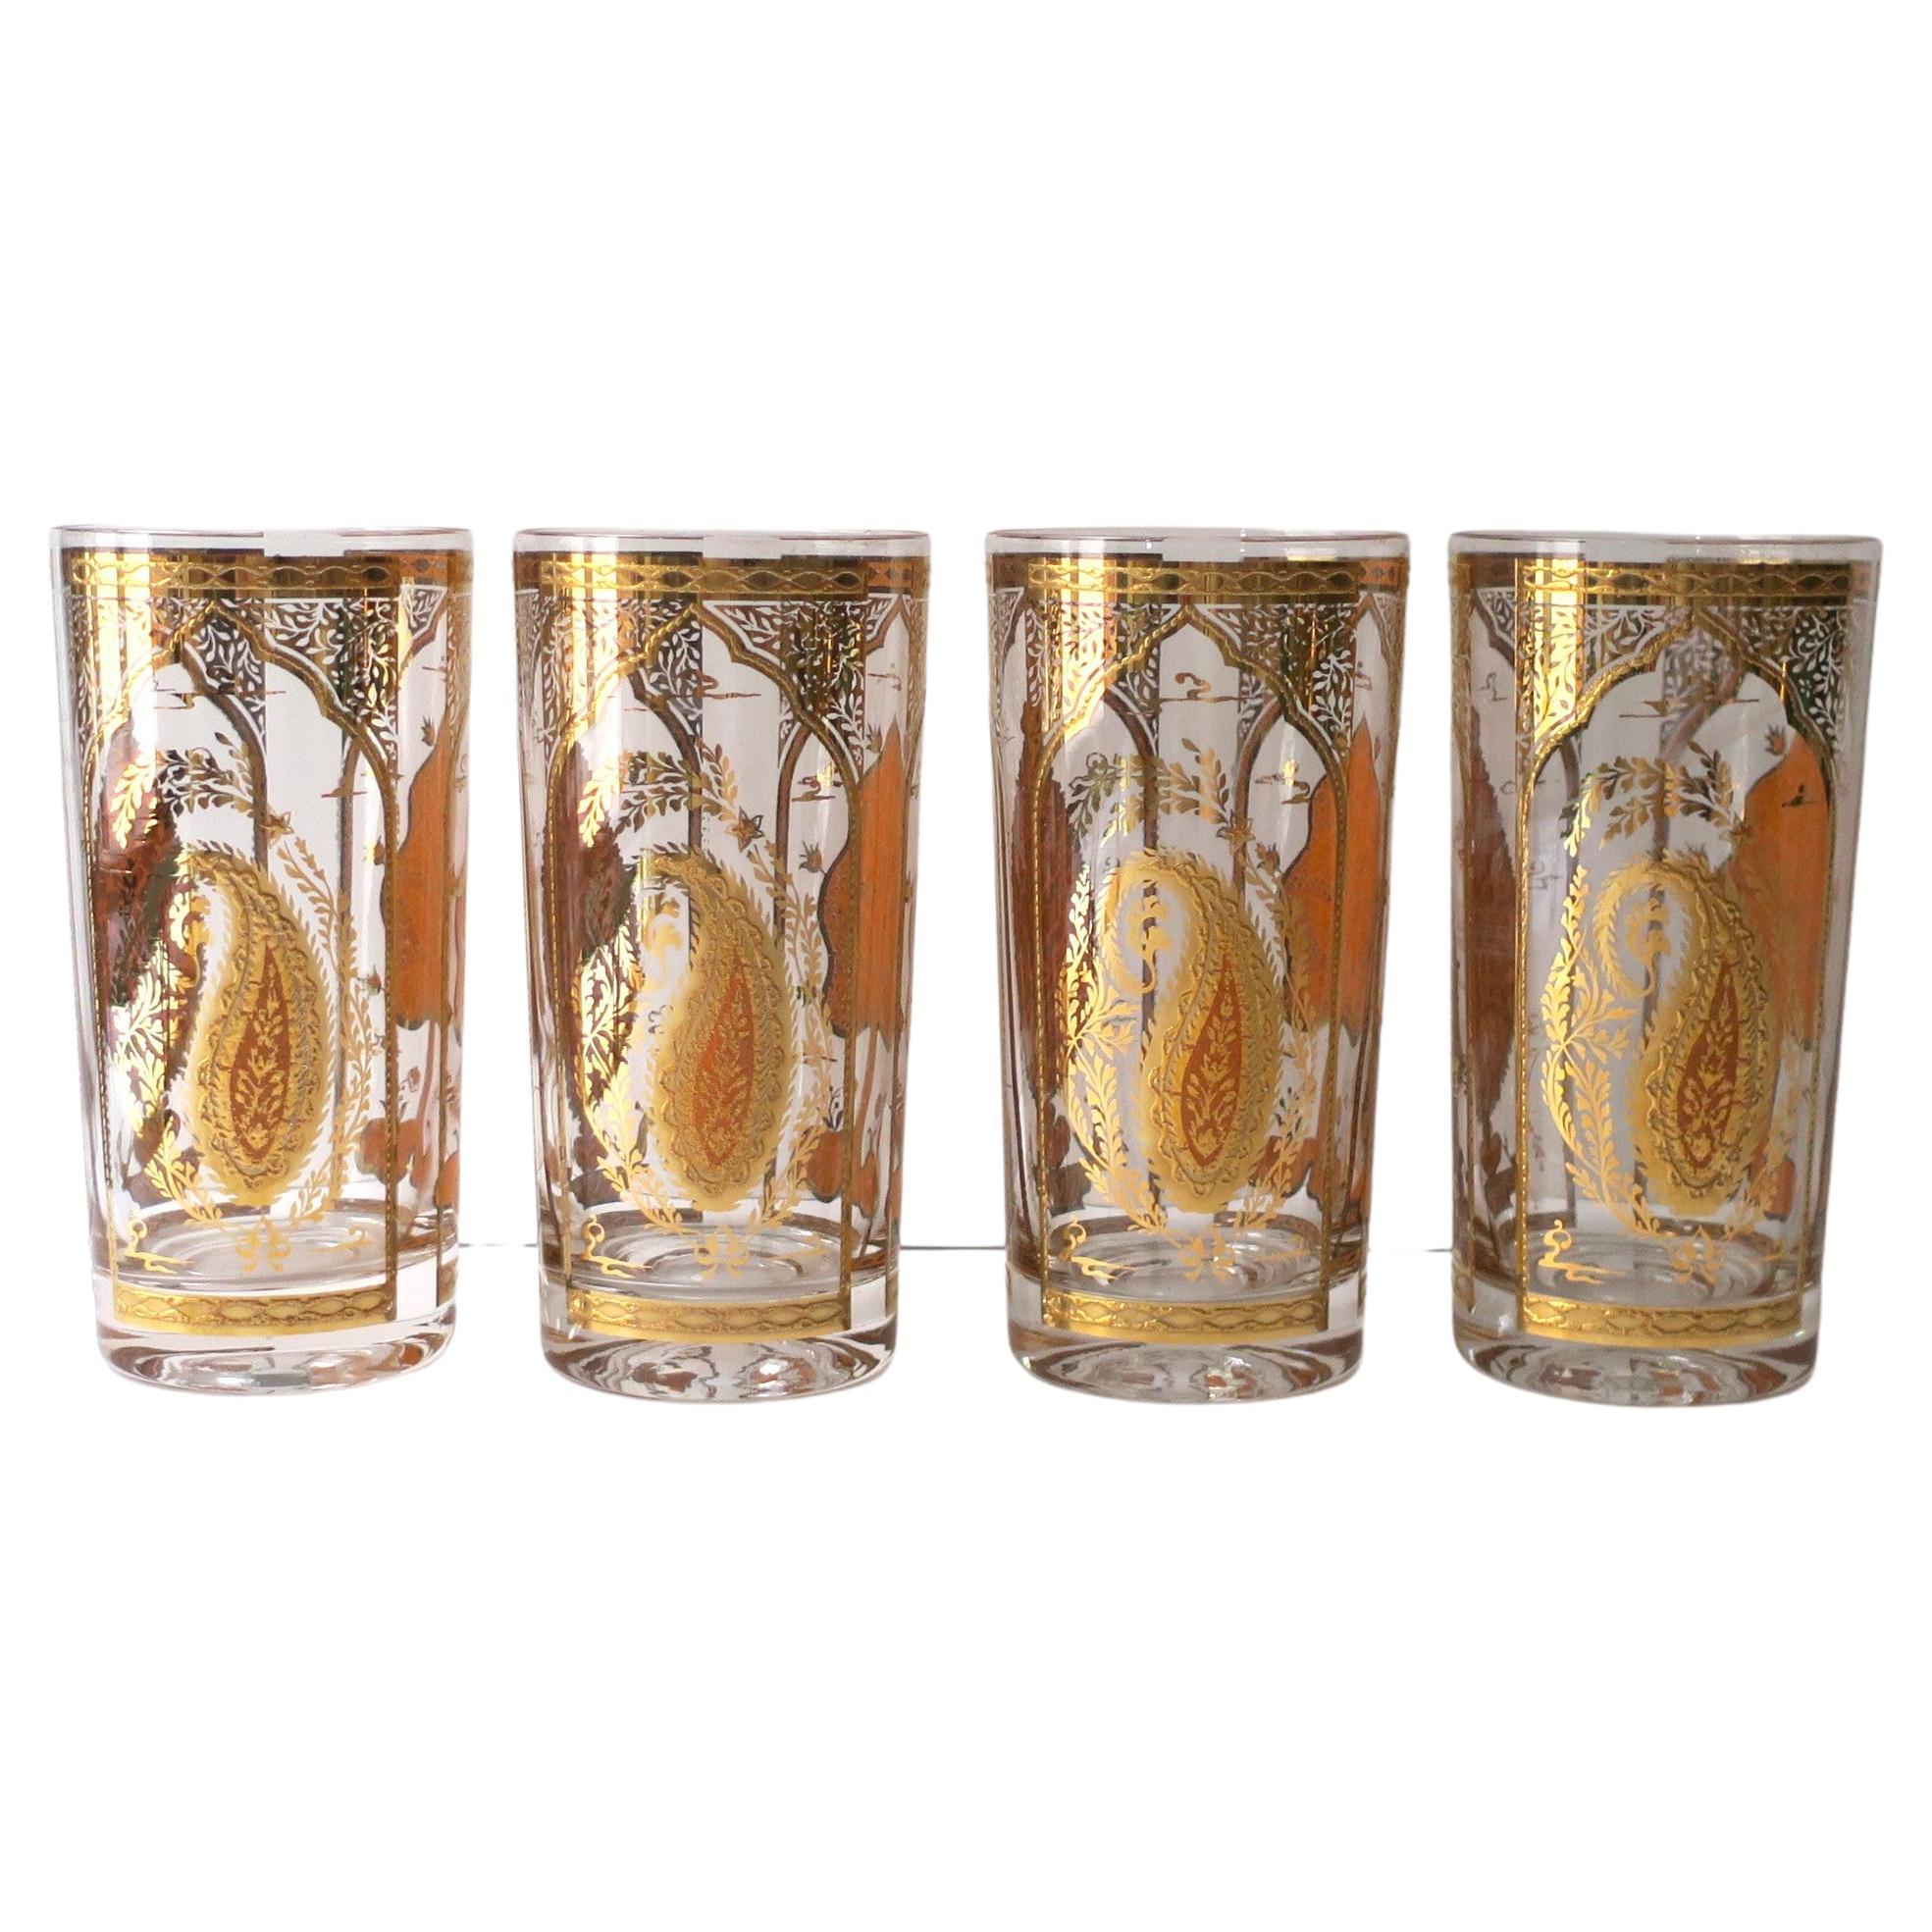 https://a.1stdibscdn.com/gold-paisley-moroccan-highball-cocktail-glasses-by-culver-set-of-4-for-sale/f_13142/f_357886421692586803749/f_35788642_1692586804538_bg_processed.jpg